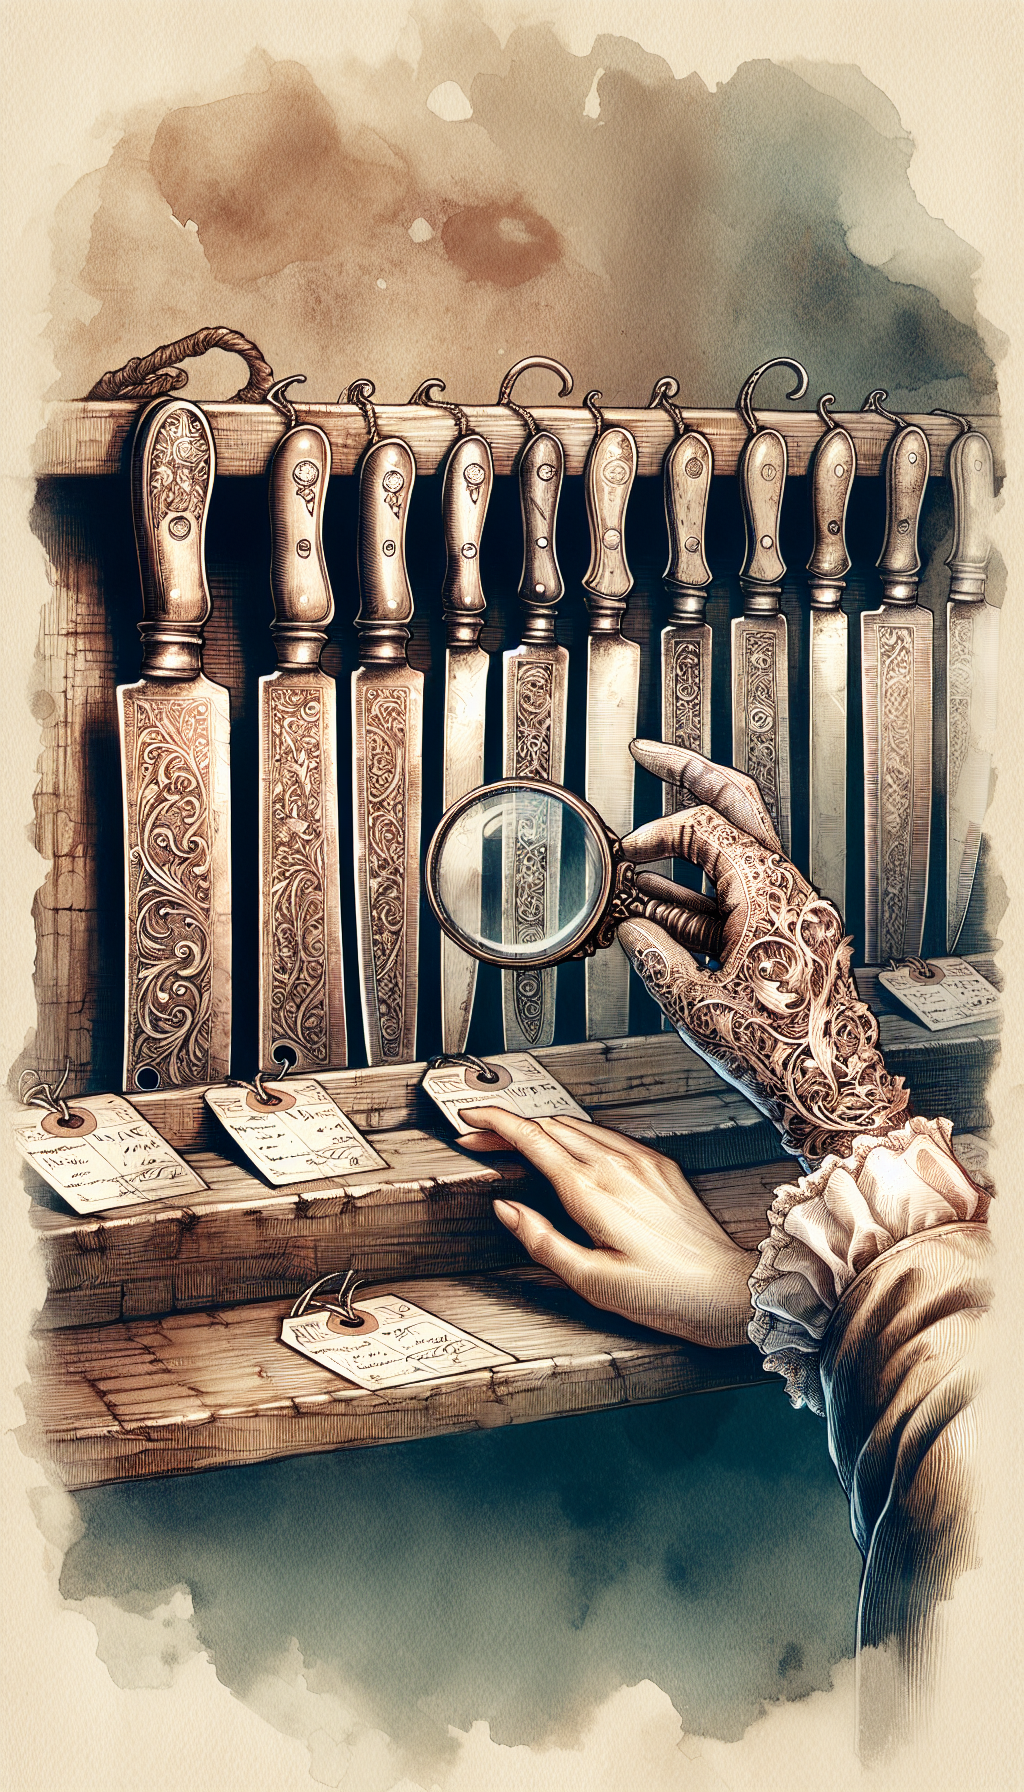 An elegant, gently aging hand in vintage attire dusts a row of ornate, antique meat cleavers aligned on a rustic wooden shelf, their unique engravings glowing. Each cleaver bears a tag with dates and origin, hovering magnifying glass revealing the intricate details for identification. Background styles shift from watercolor softness around the hand to sharp, etched lines near the identifiers.